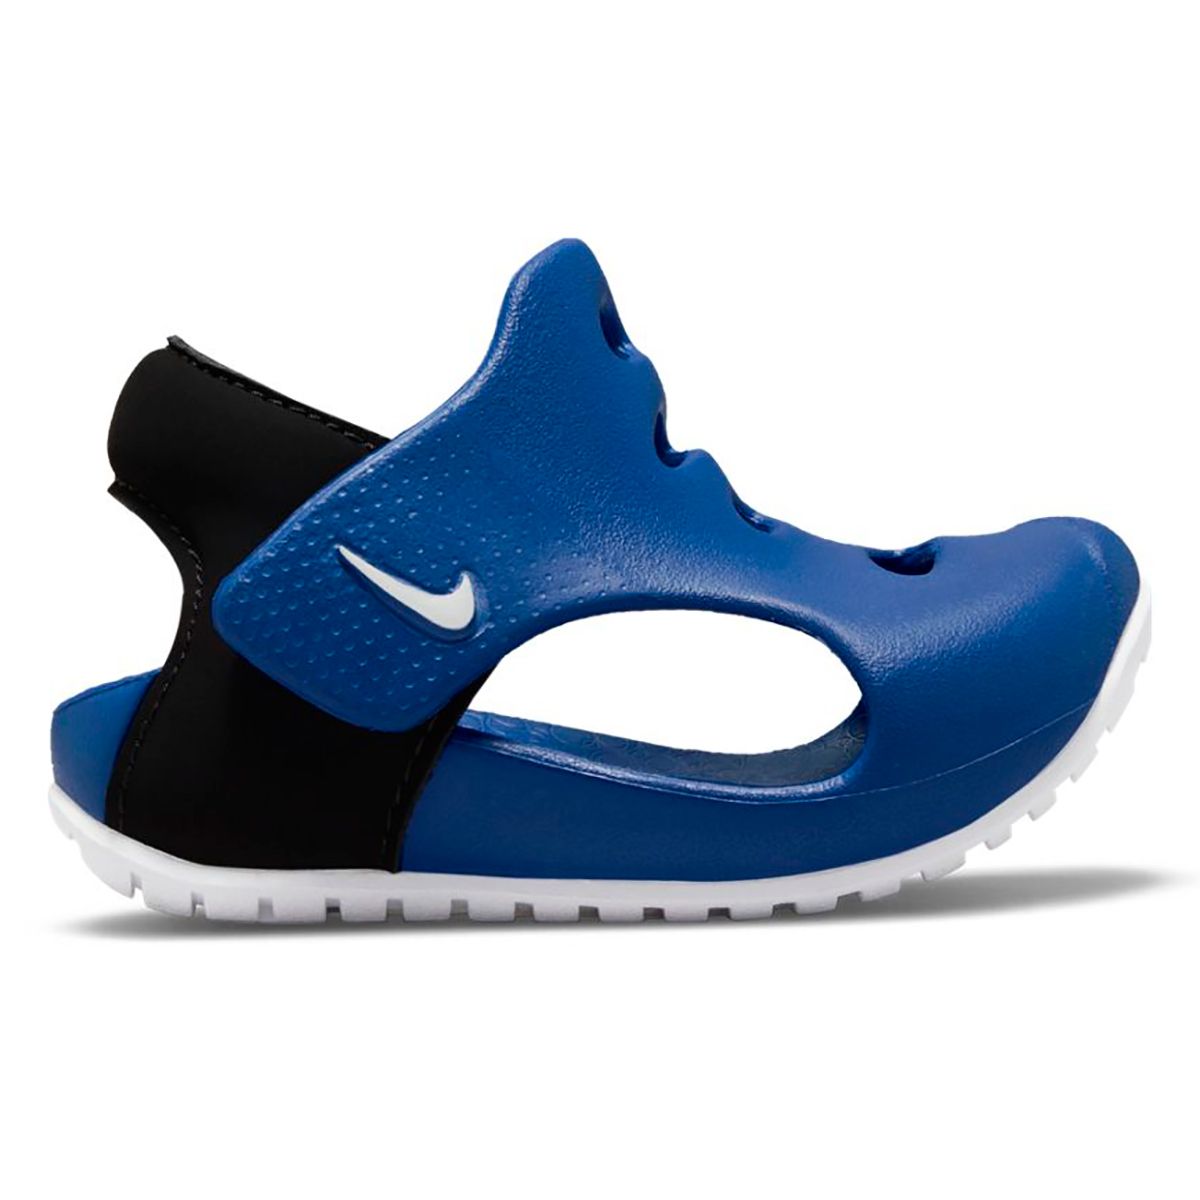 Nike Sunray Protect 3 DH9465-400 Toddler Sandals